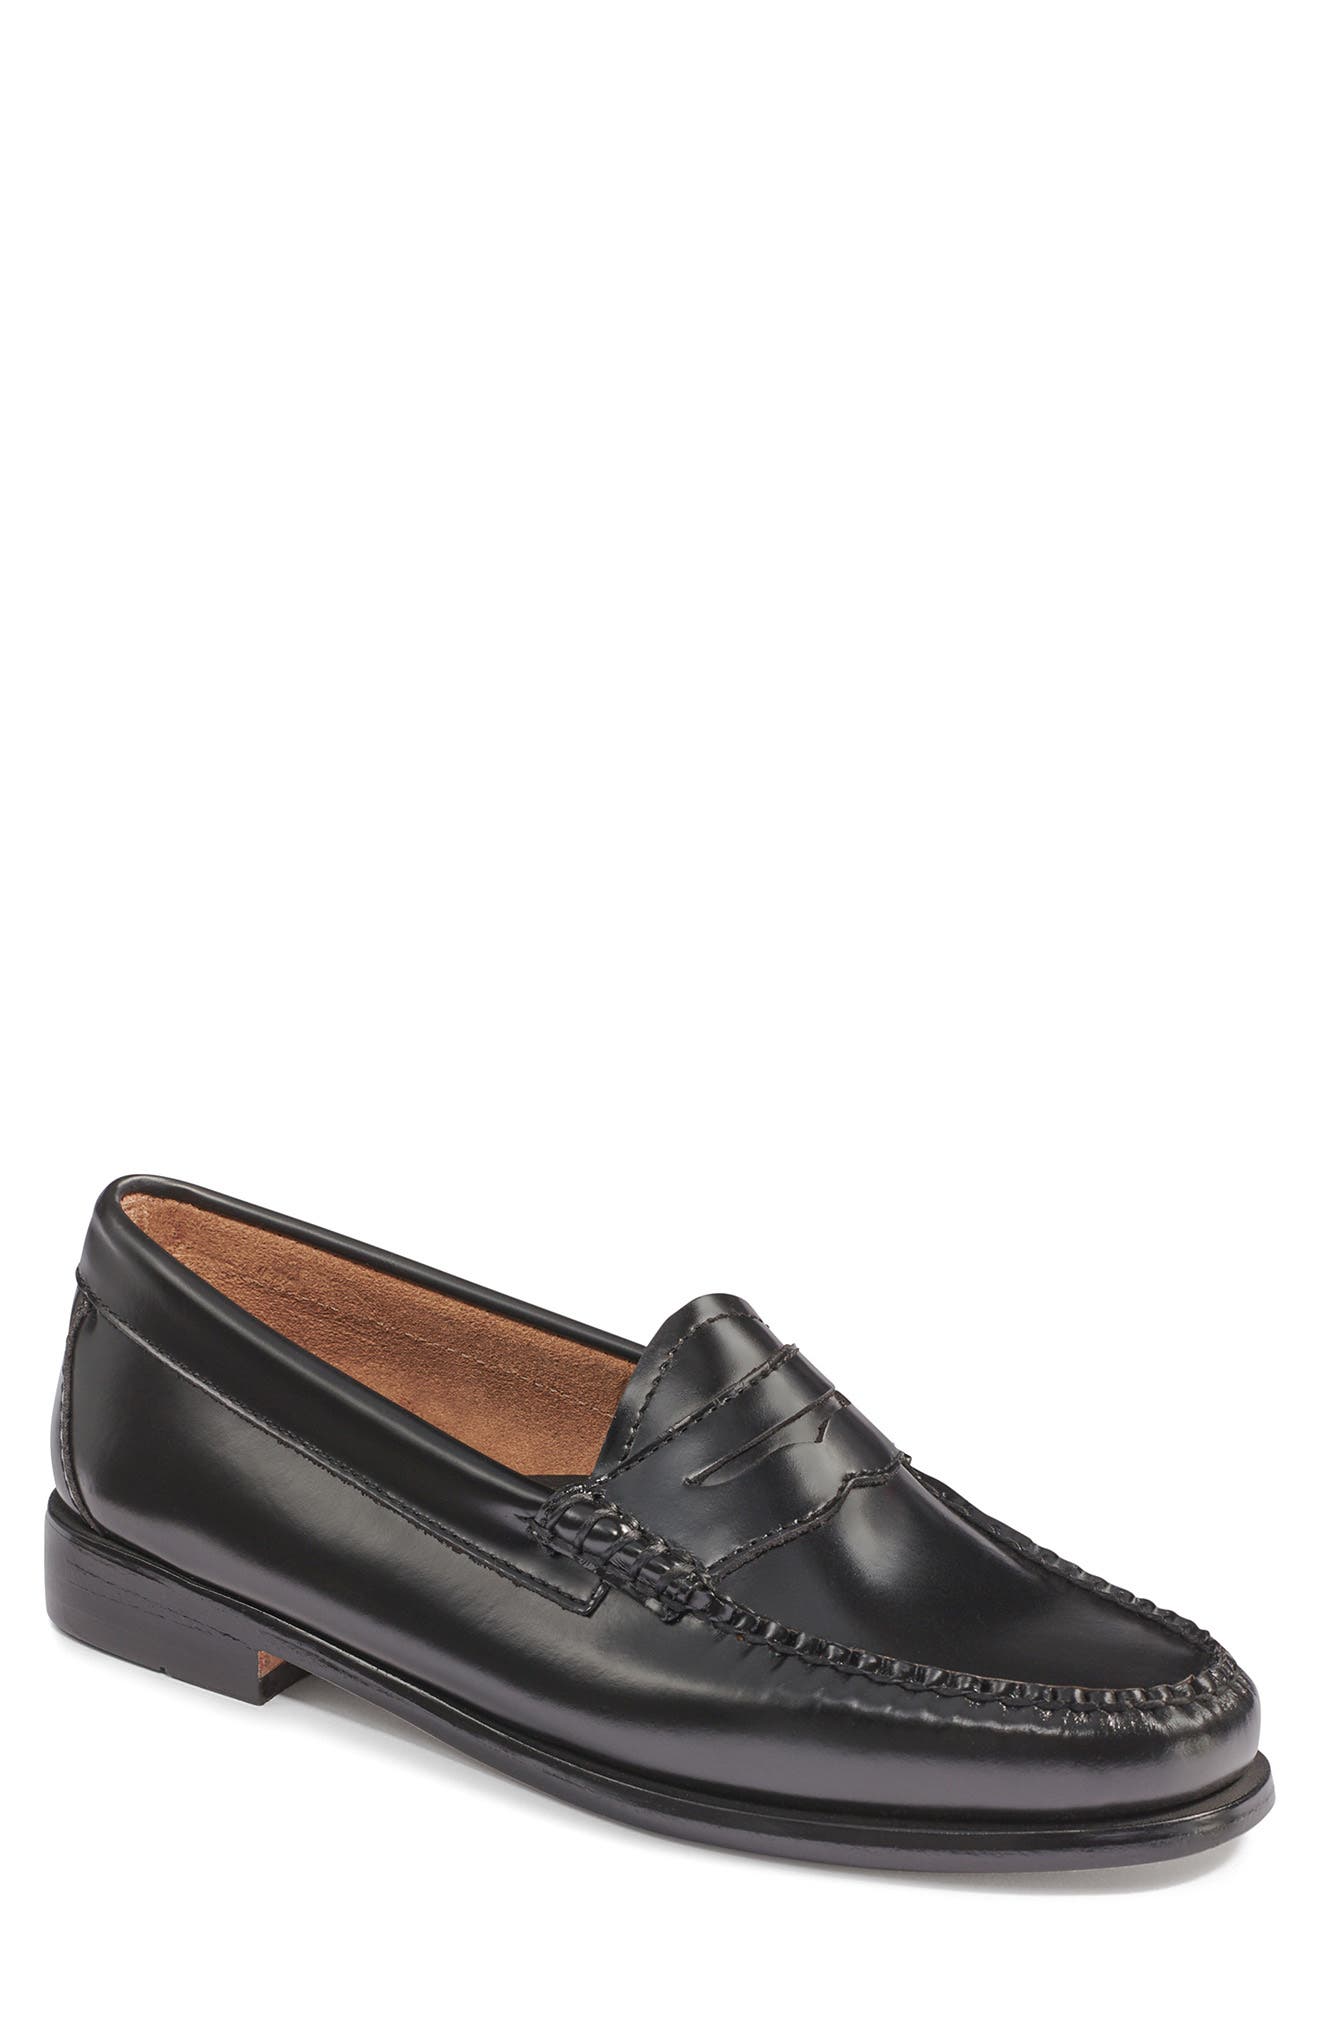 G.H. Bass Originals G.H. Bass & Co. Whitney Leather Loafer in Cognac Leather at Nordstrom